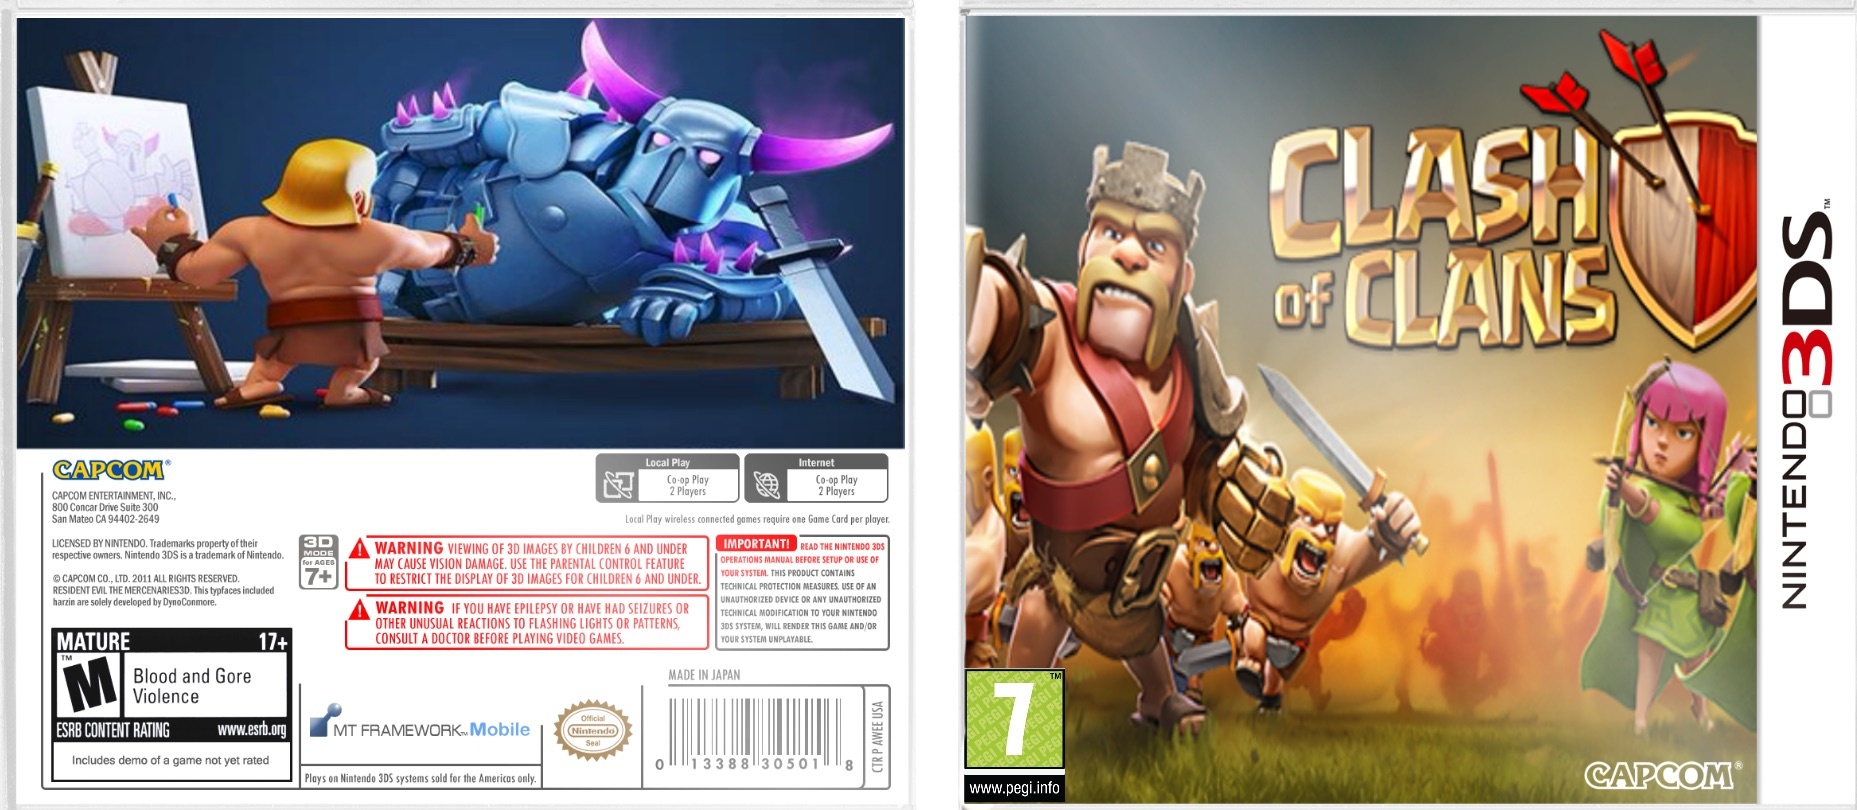 Clash of clan Nintendo 3DS box cover